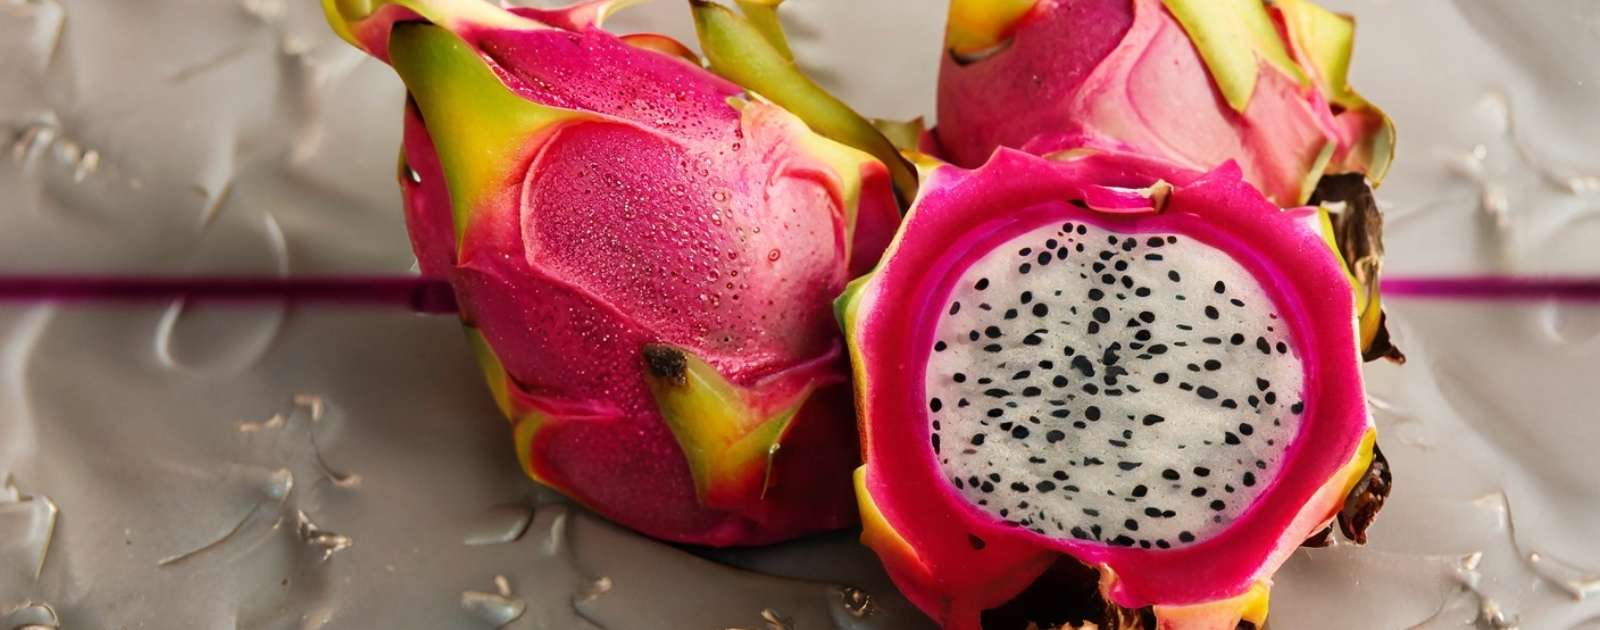 Dragon Fruit Brown Inside: How to Tell if It's Bad and Tips on Consumption